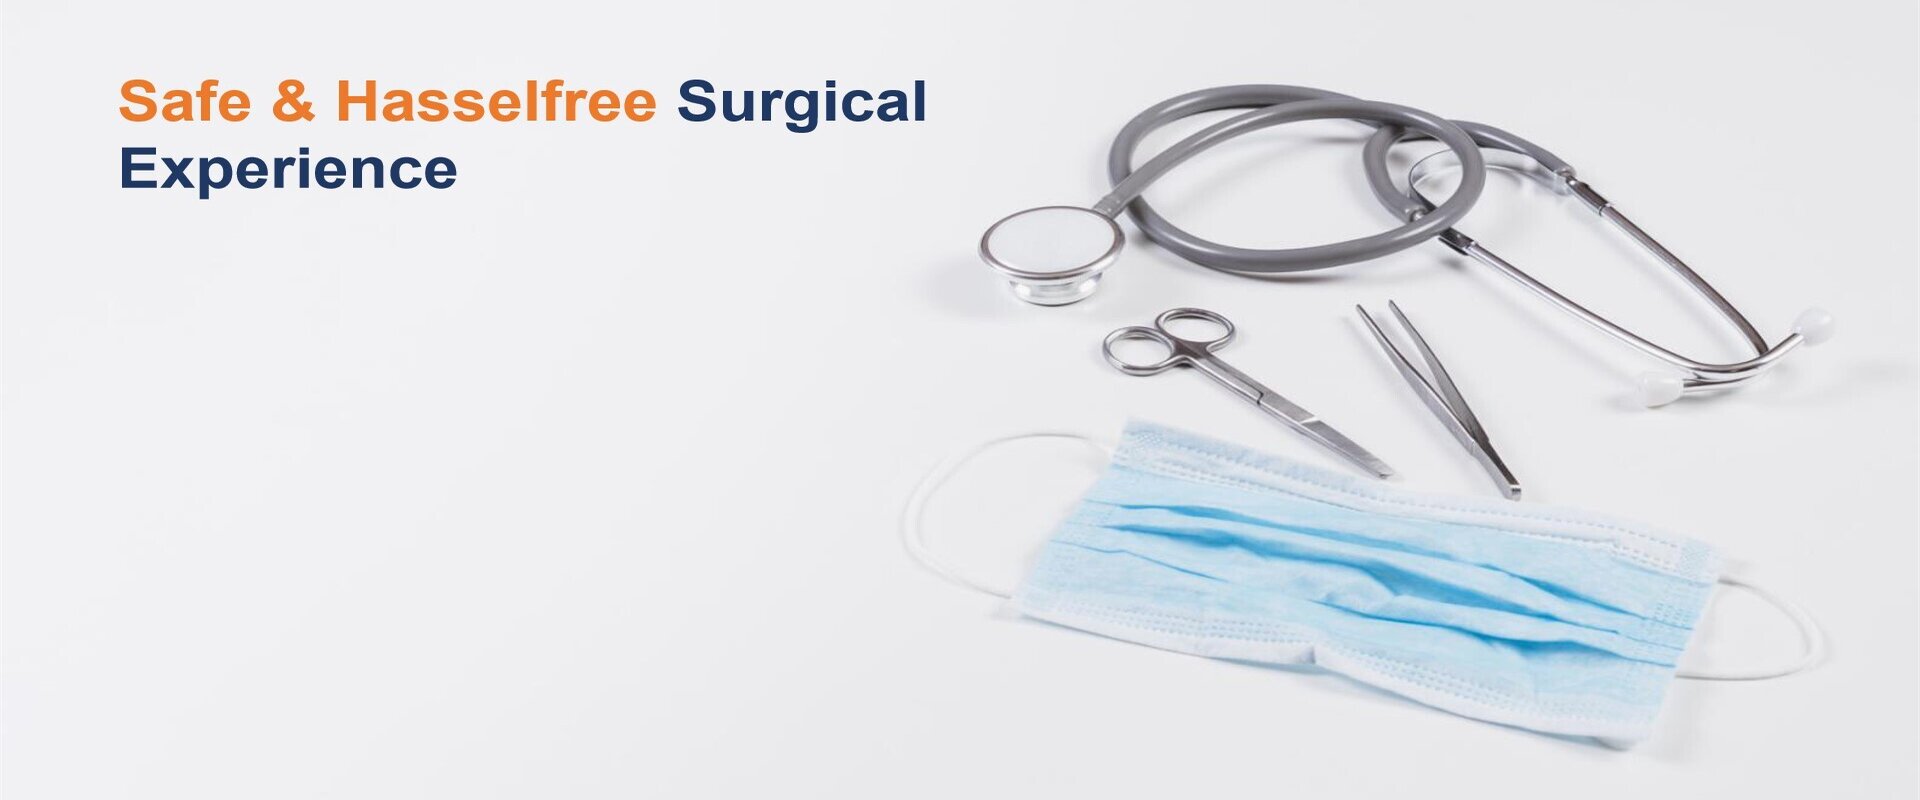 We provide best in class Surgical Solutions